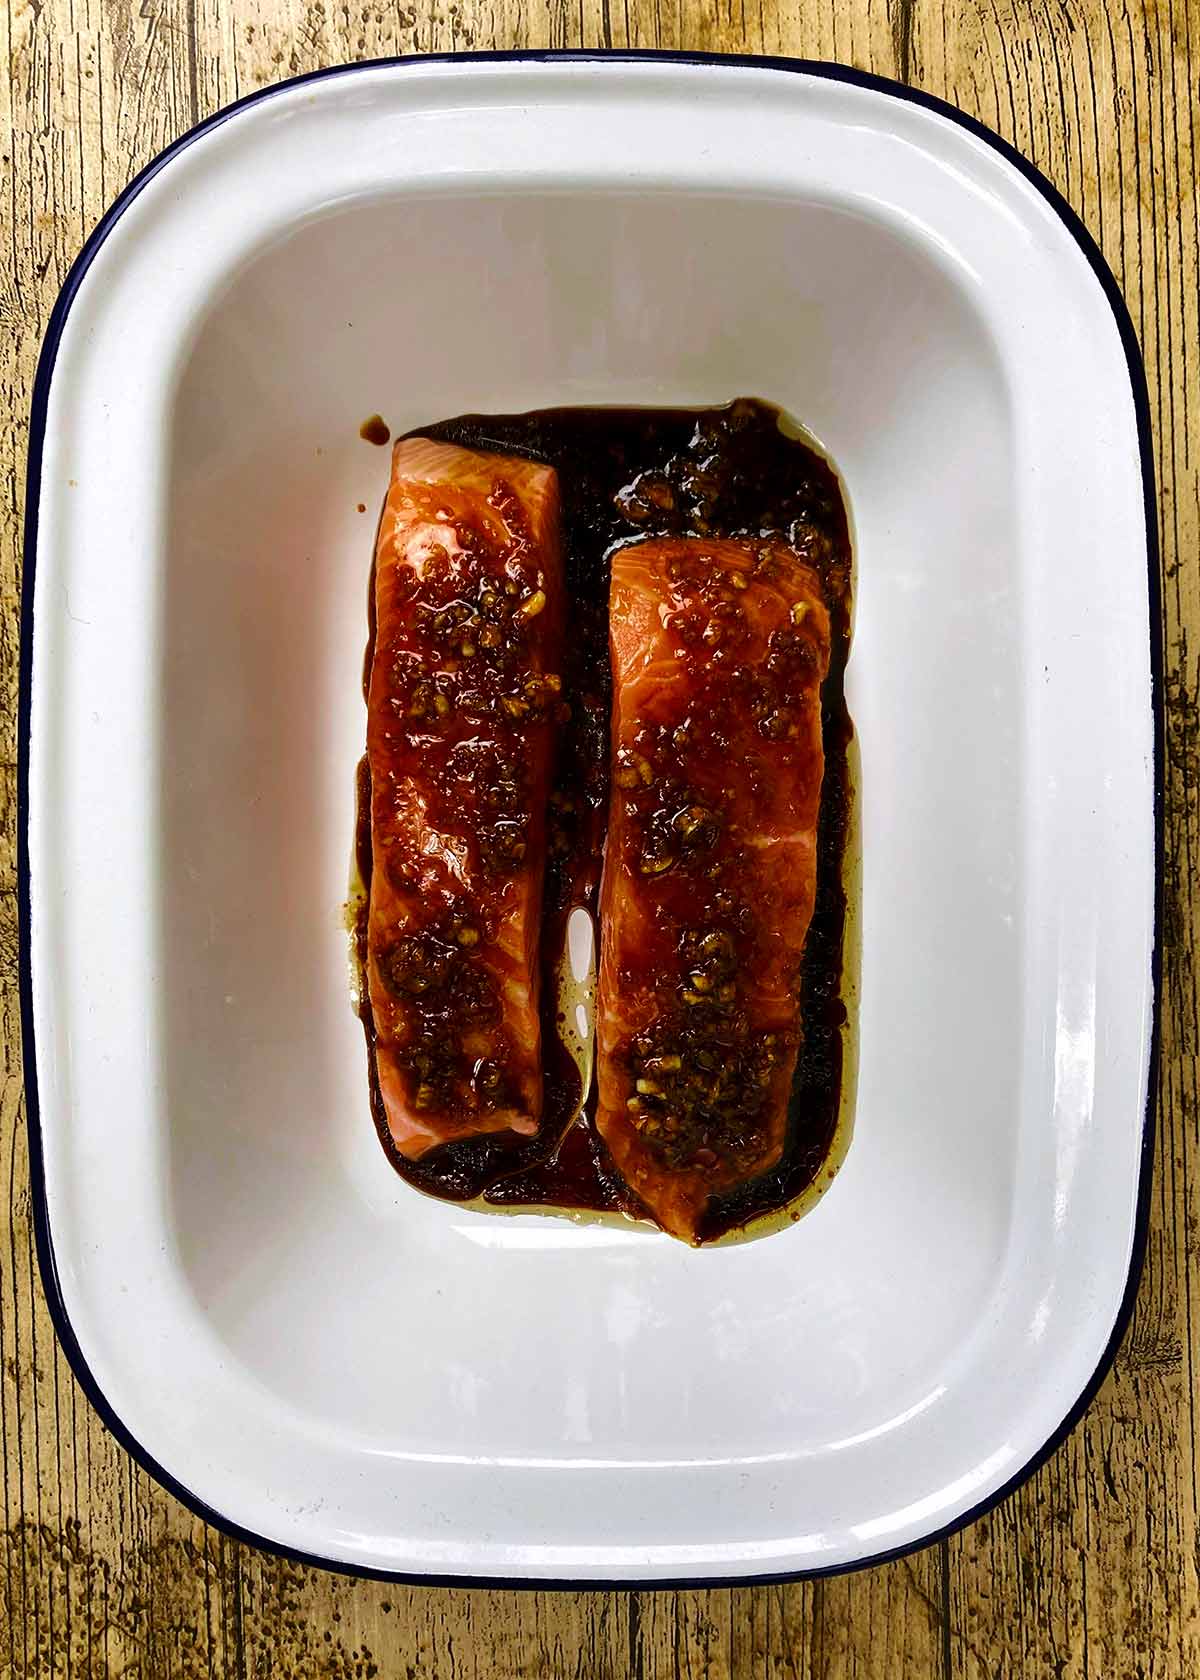 Two salmon fillets in a baking dish with marinade poured over them.